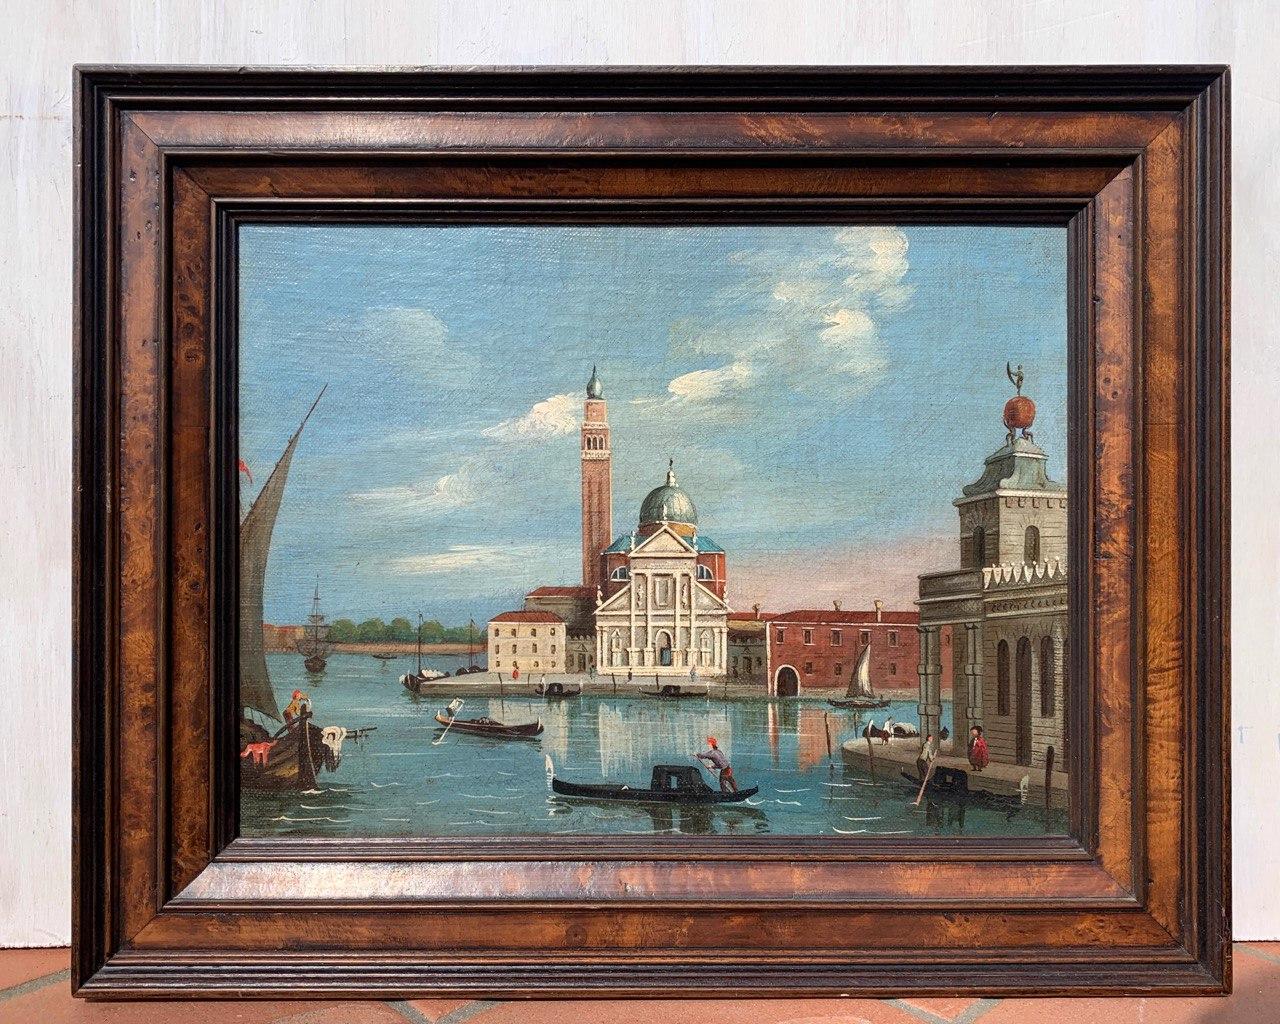 Venetian vedutist (Canaletto follower) - Late 19th century painting - Venice - Painting by Giovanni Antonio Canal (Canaletto)